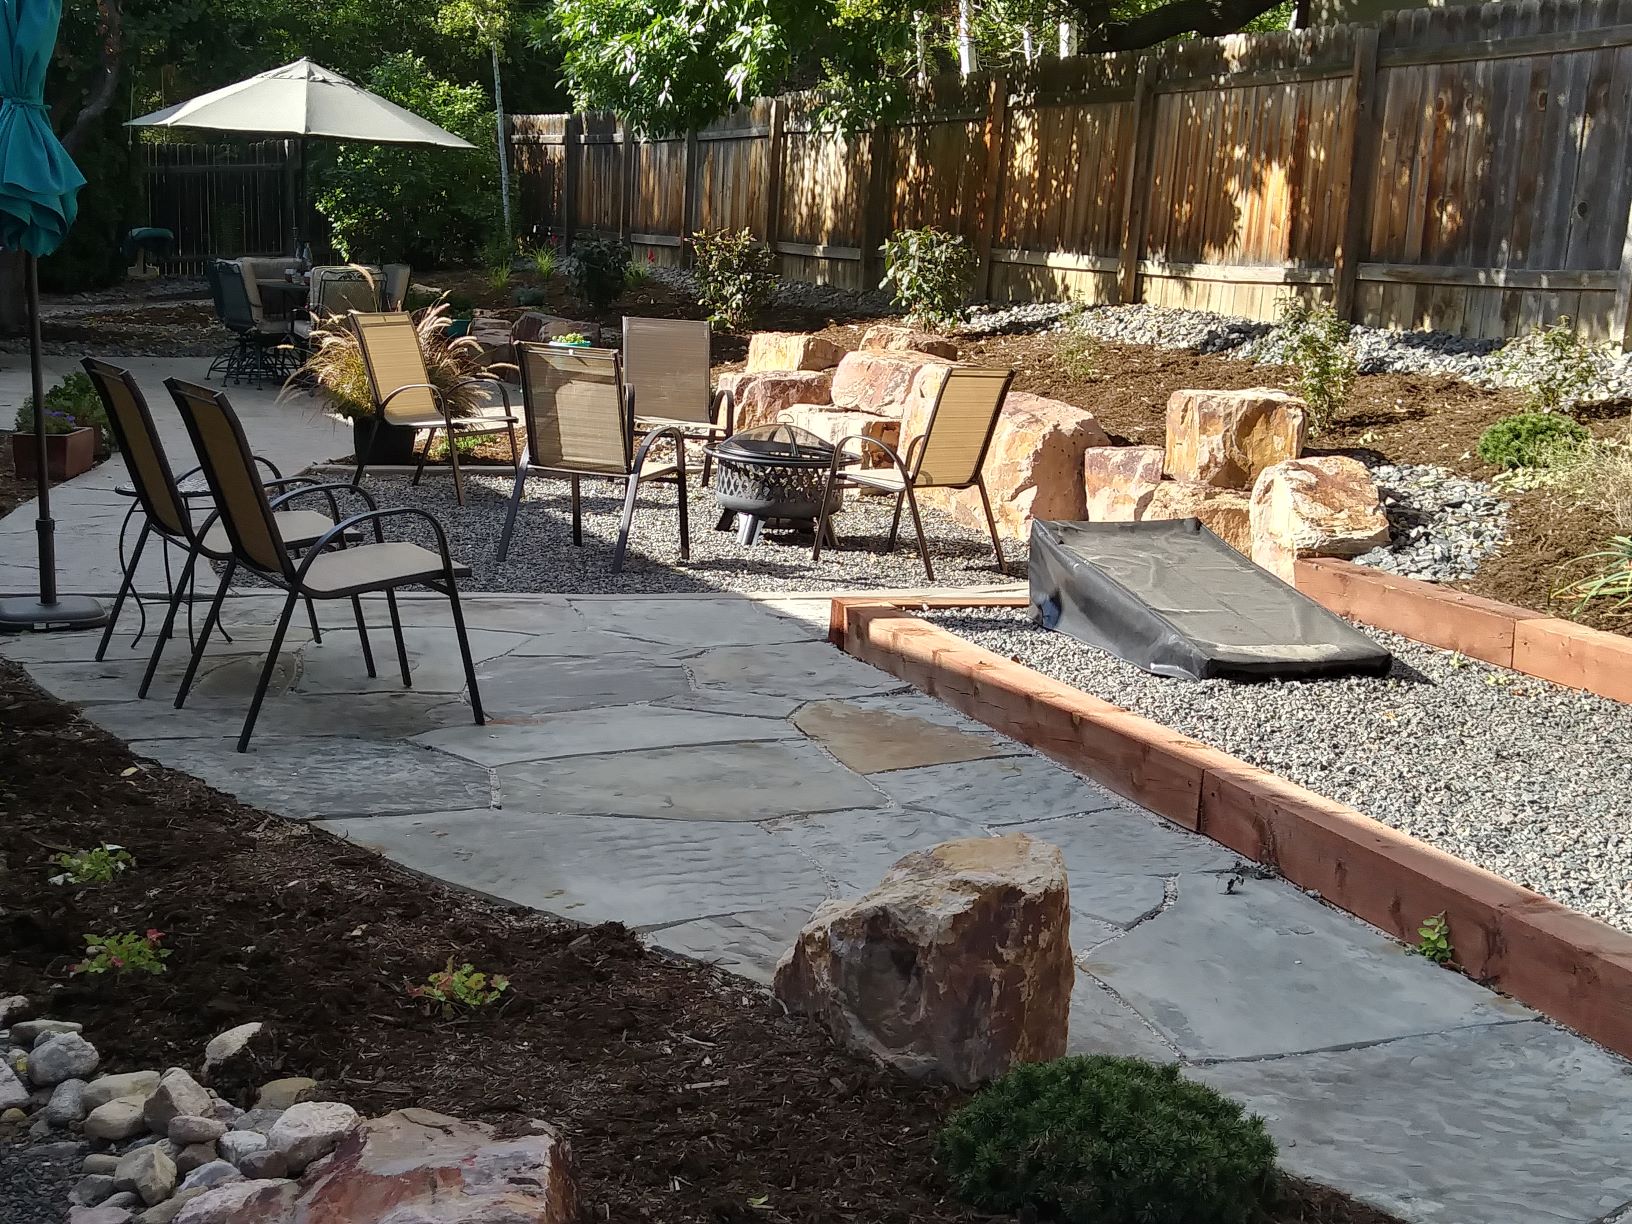 Backyard seating area with flat stone patio and gravel chair area. Surrounded by mulch with low water bushes and plants.